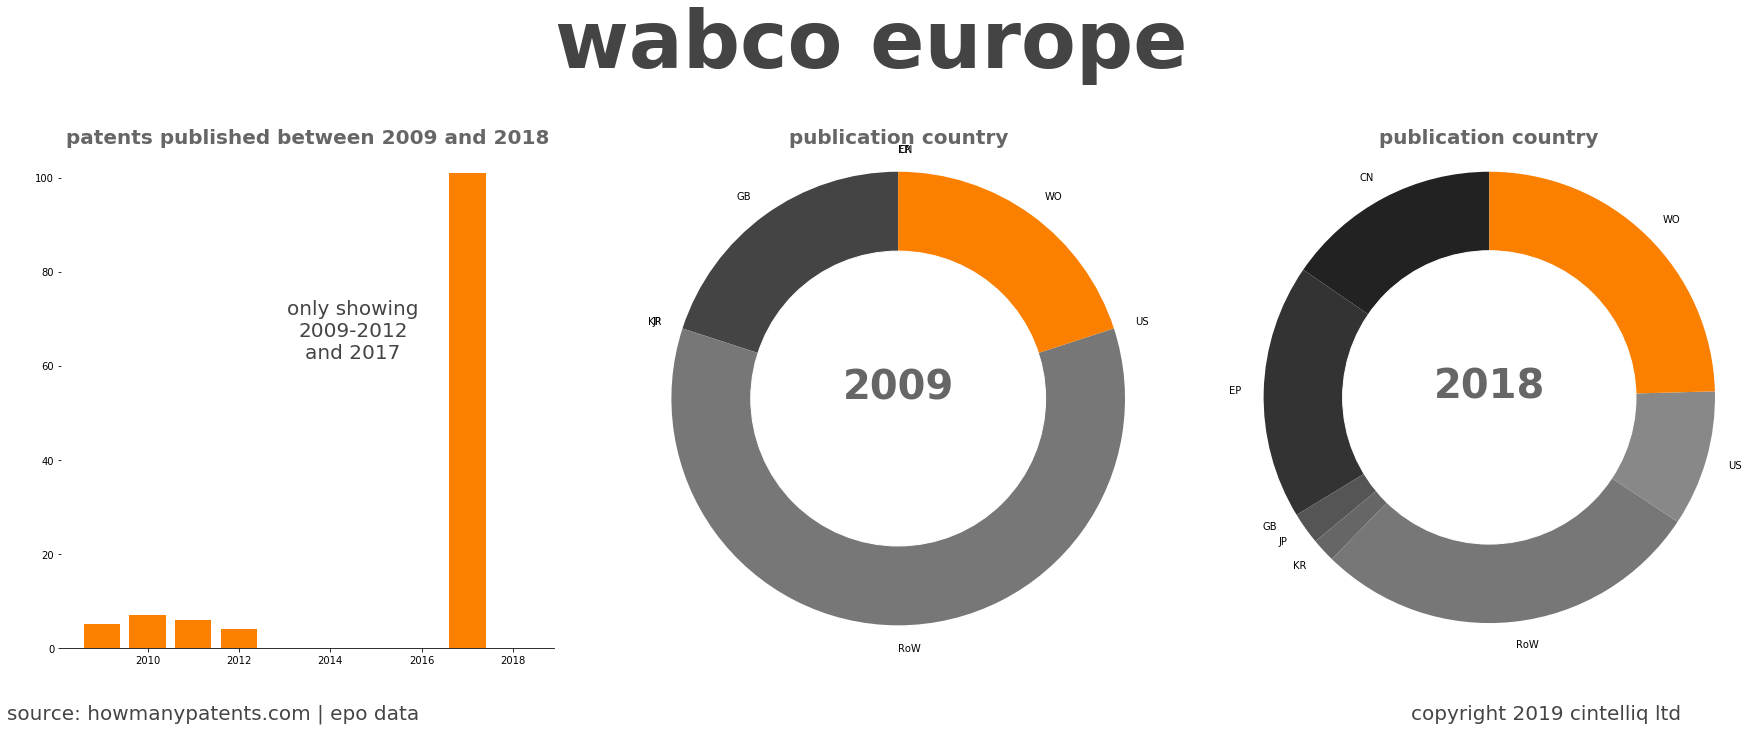 summary of patents for Wabco Europe